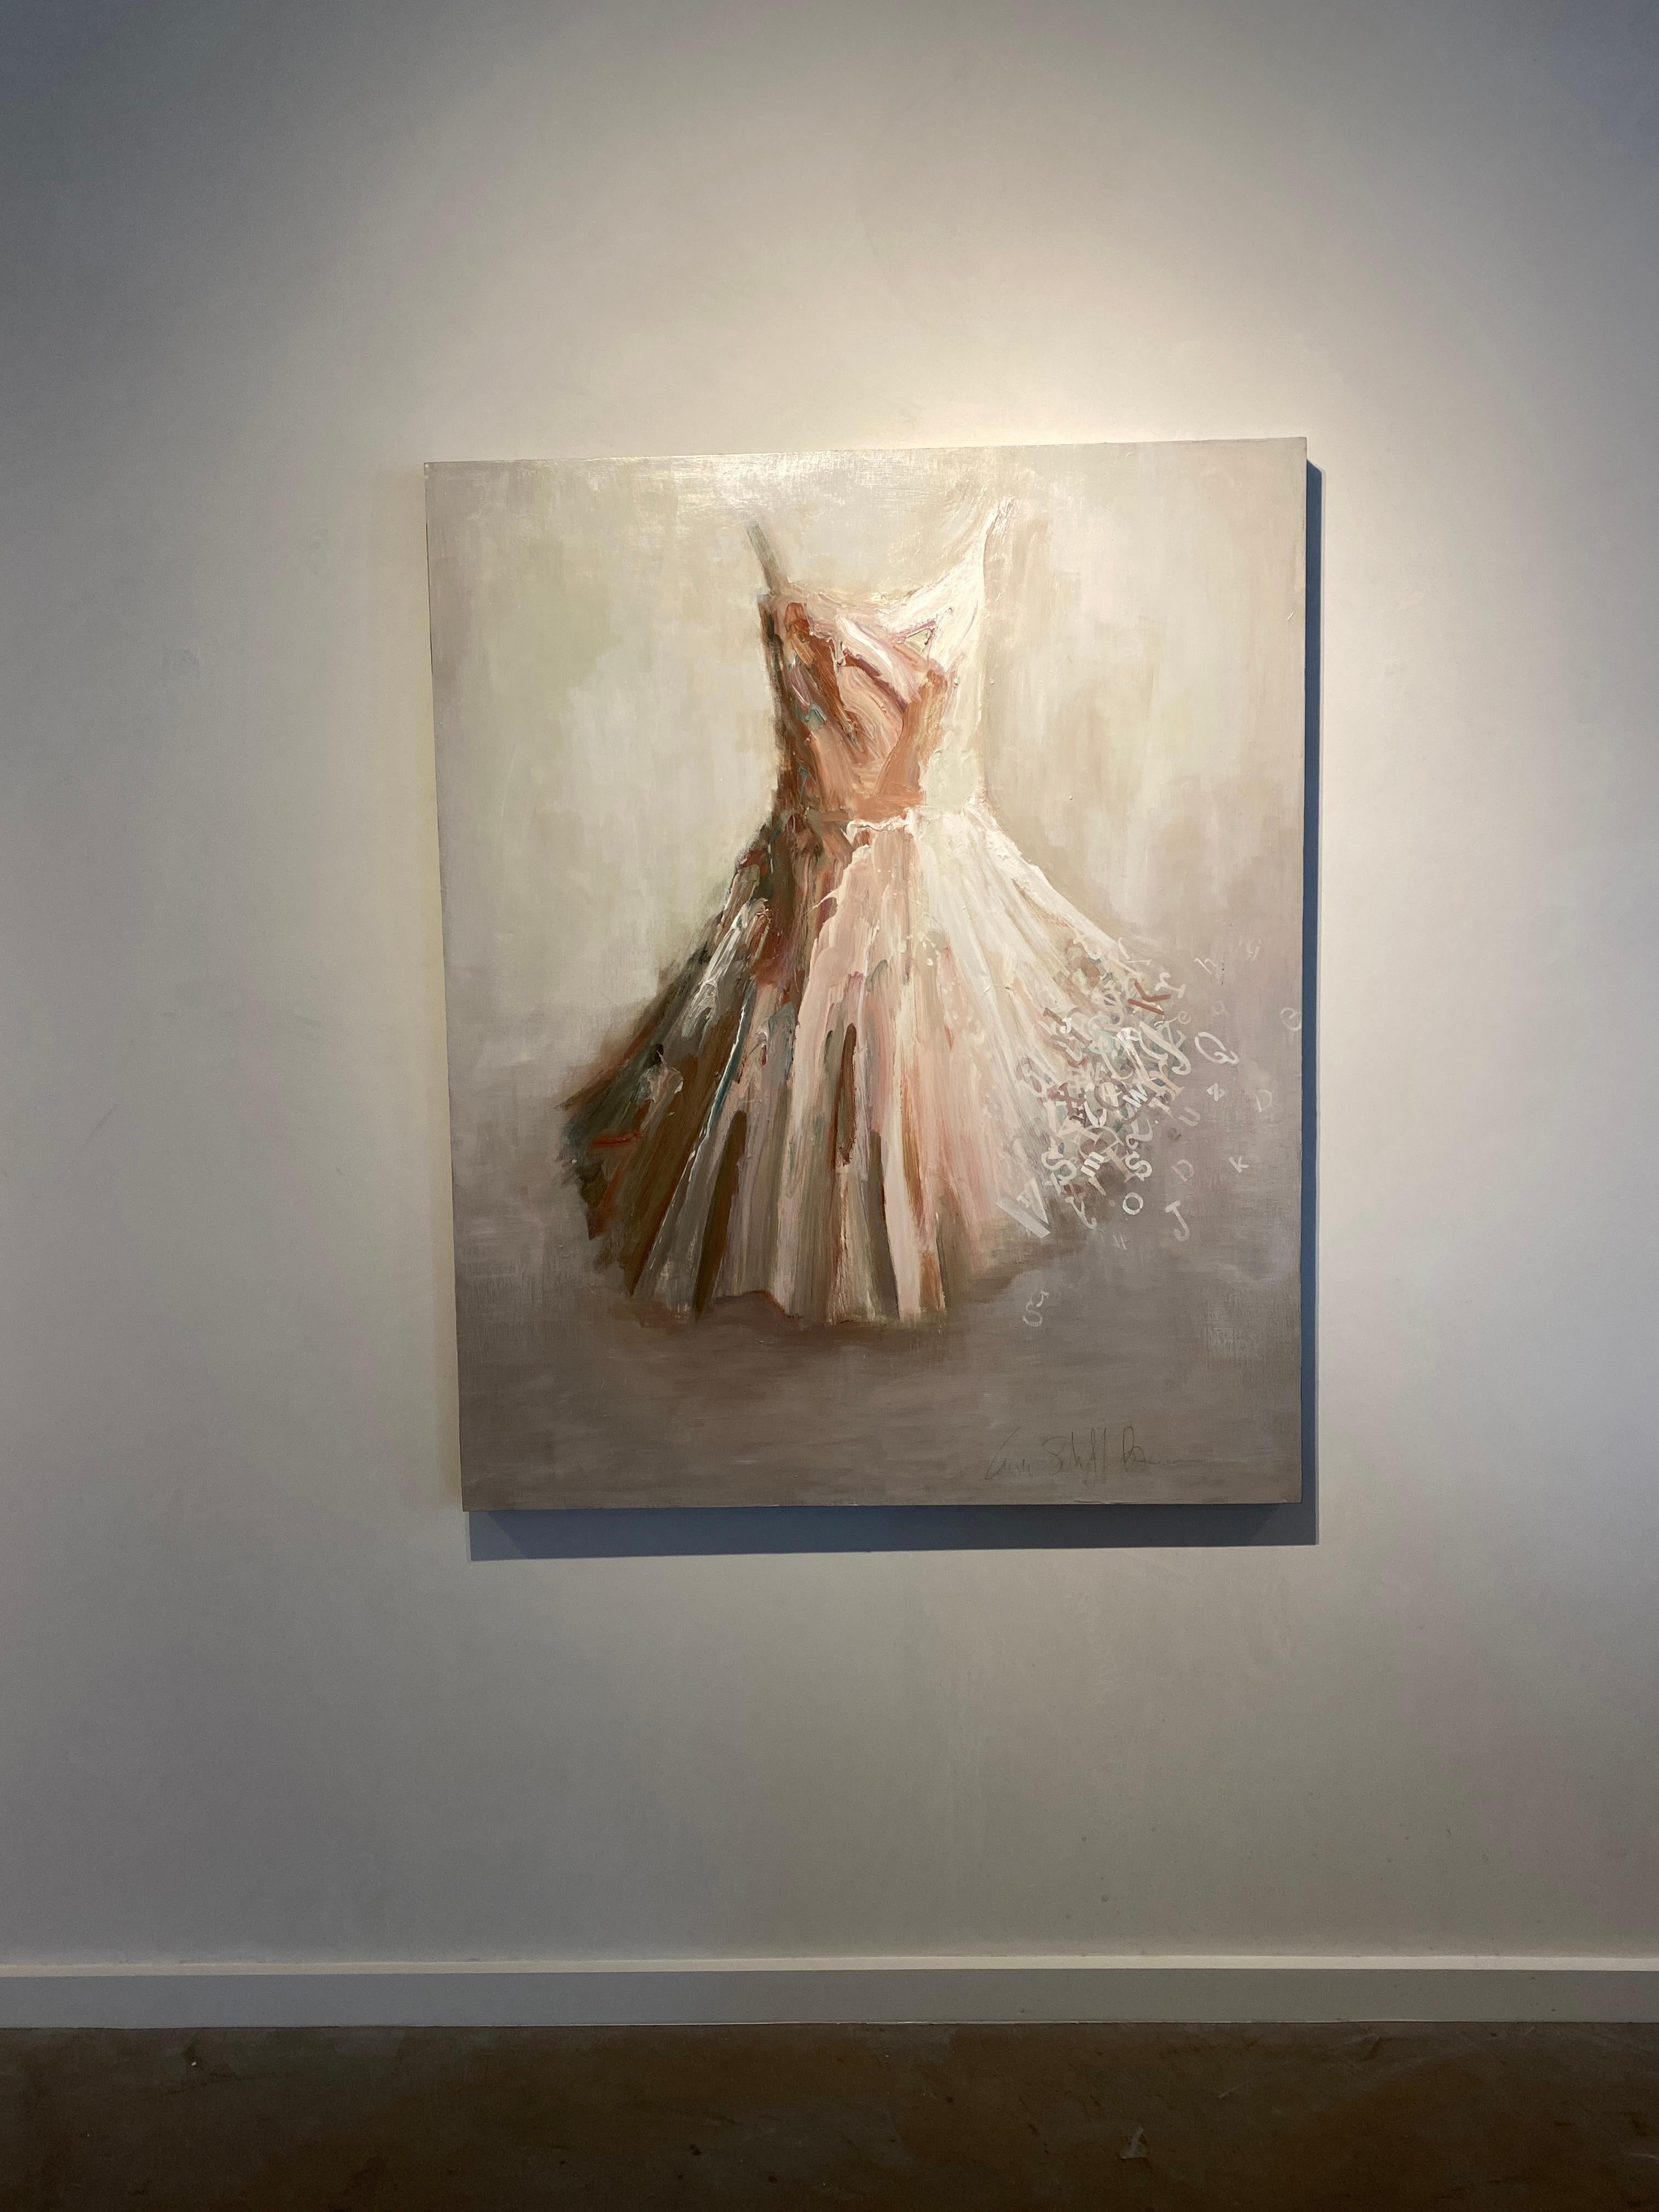 All Things Eventually- Blush toned dress portrait painting by Laura Schiff Bean 1